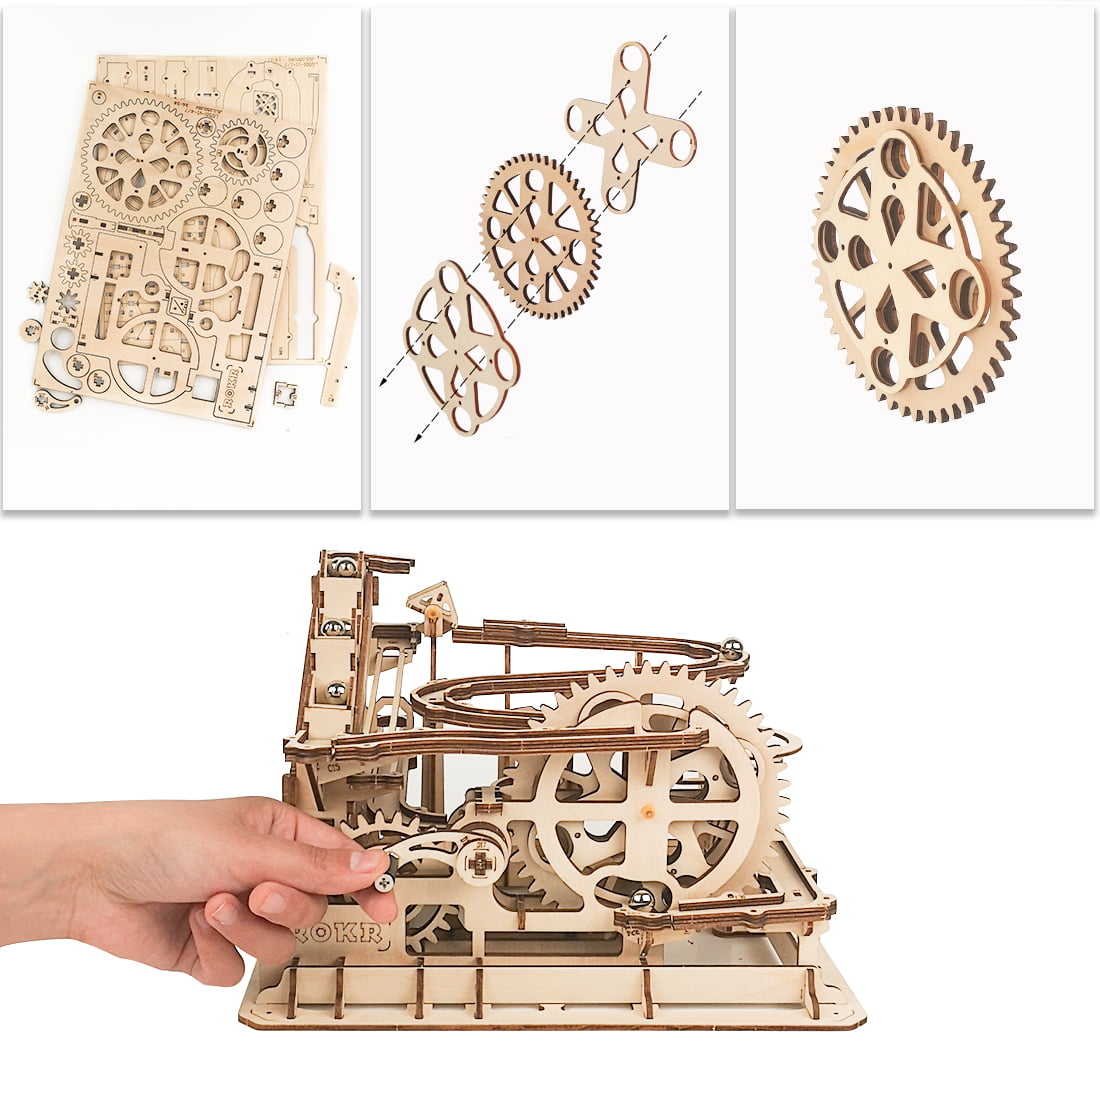  ROKR 3D Wooden Puzzles for Adults-Wooden Marble Run-Wood  Puzzles for Adults-Model Building Kits to Build for Adults-Hobbies for  Women Men : Toys & Games